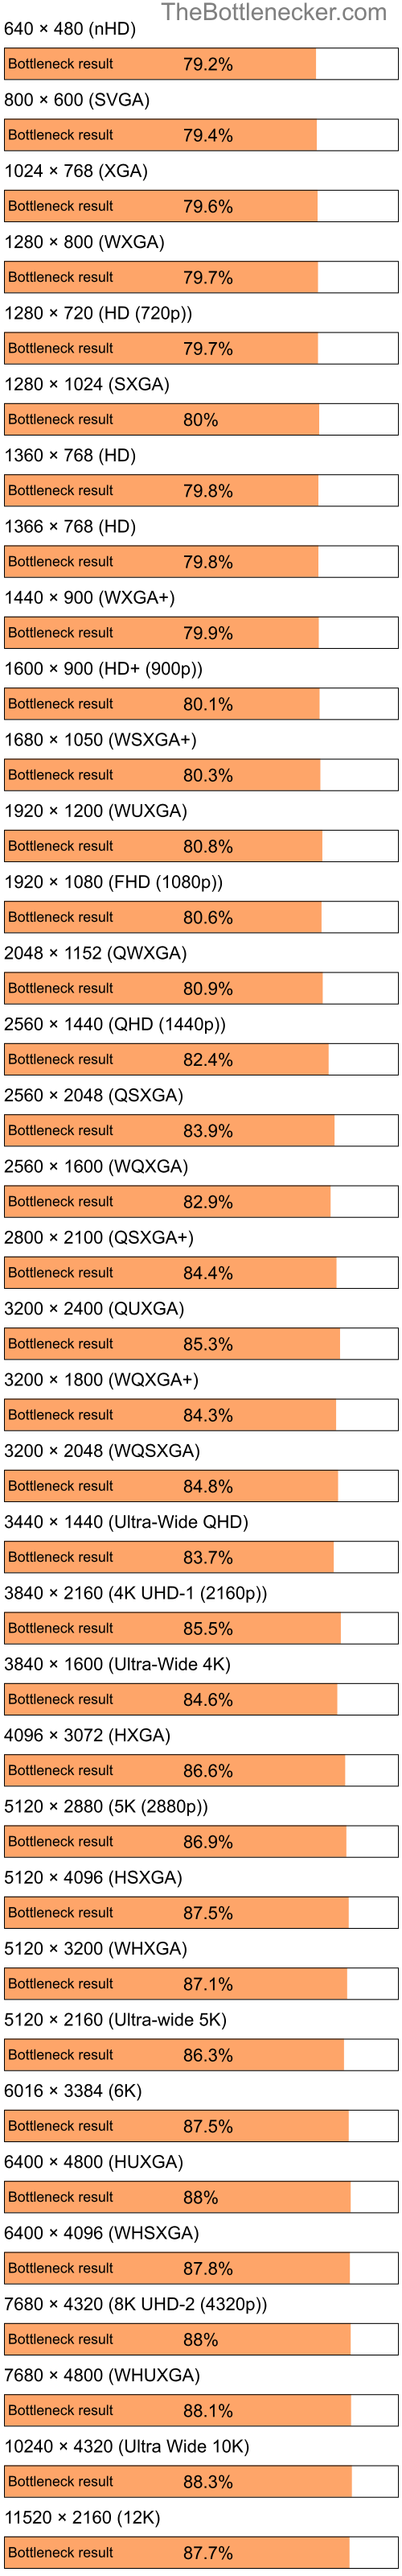 Bottleneck results by resolution for Intel Celeron M 410 and AMD Radeon 9500 9700 in Graphic Card Intense Tasks